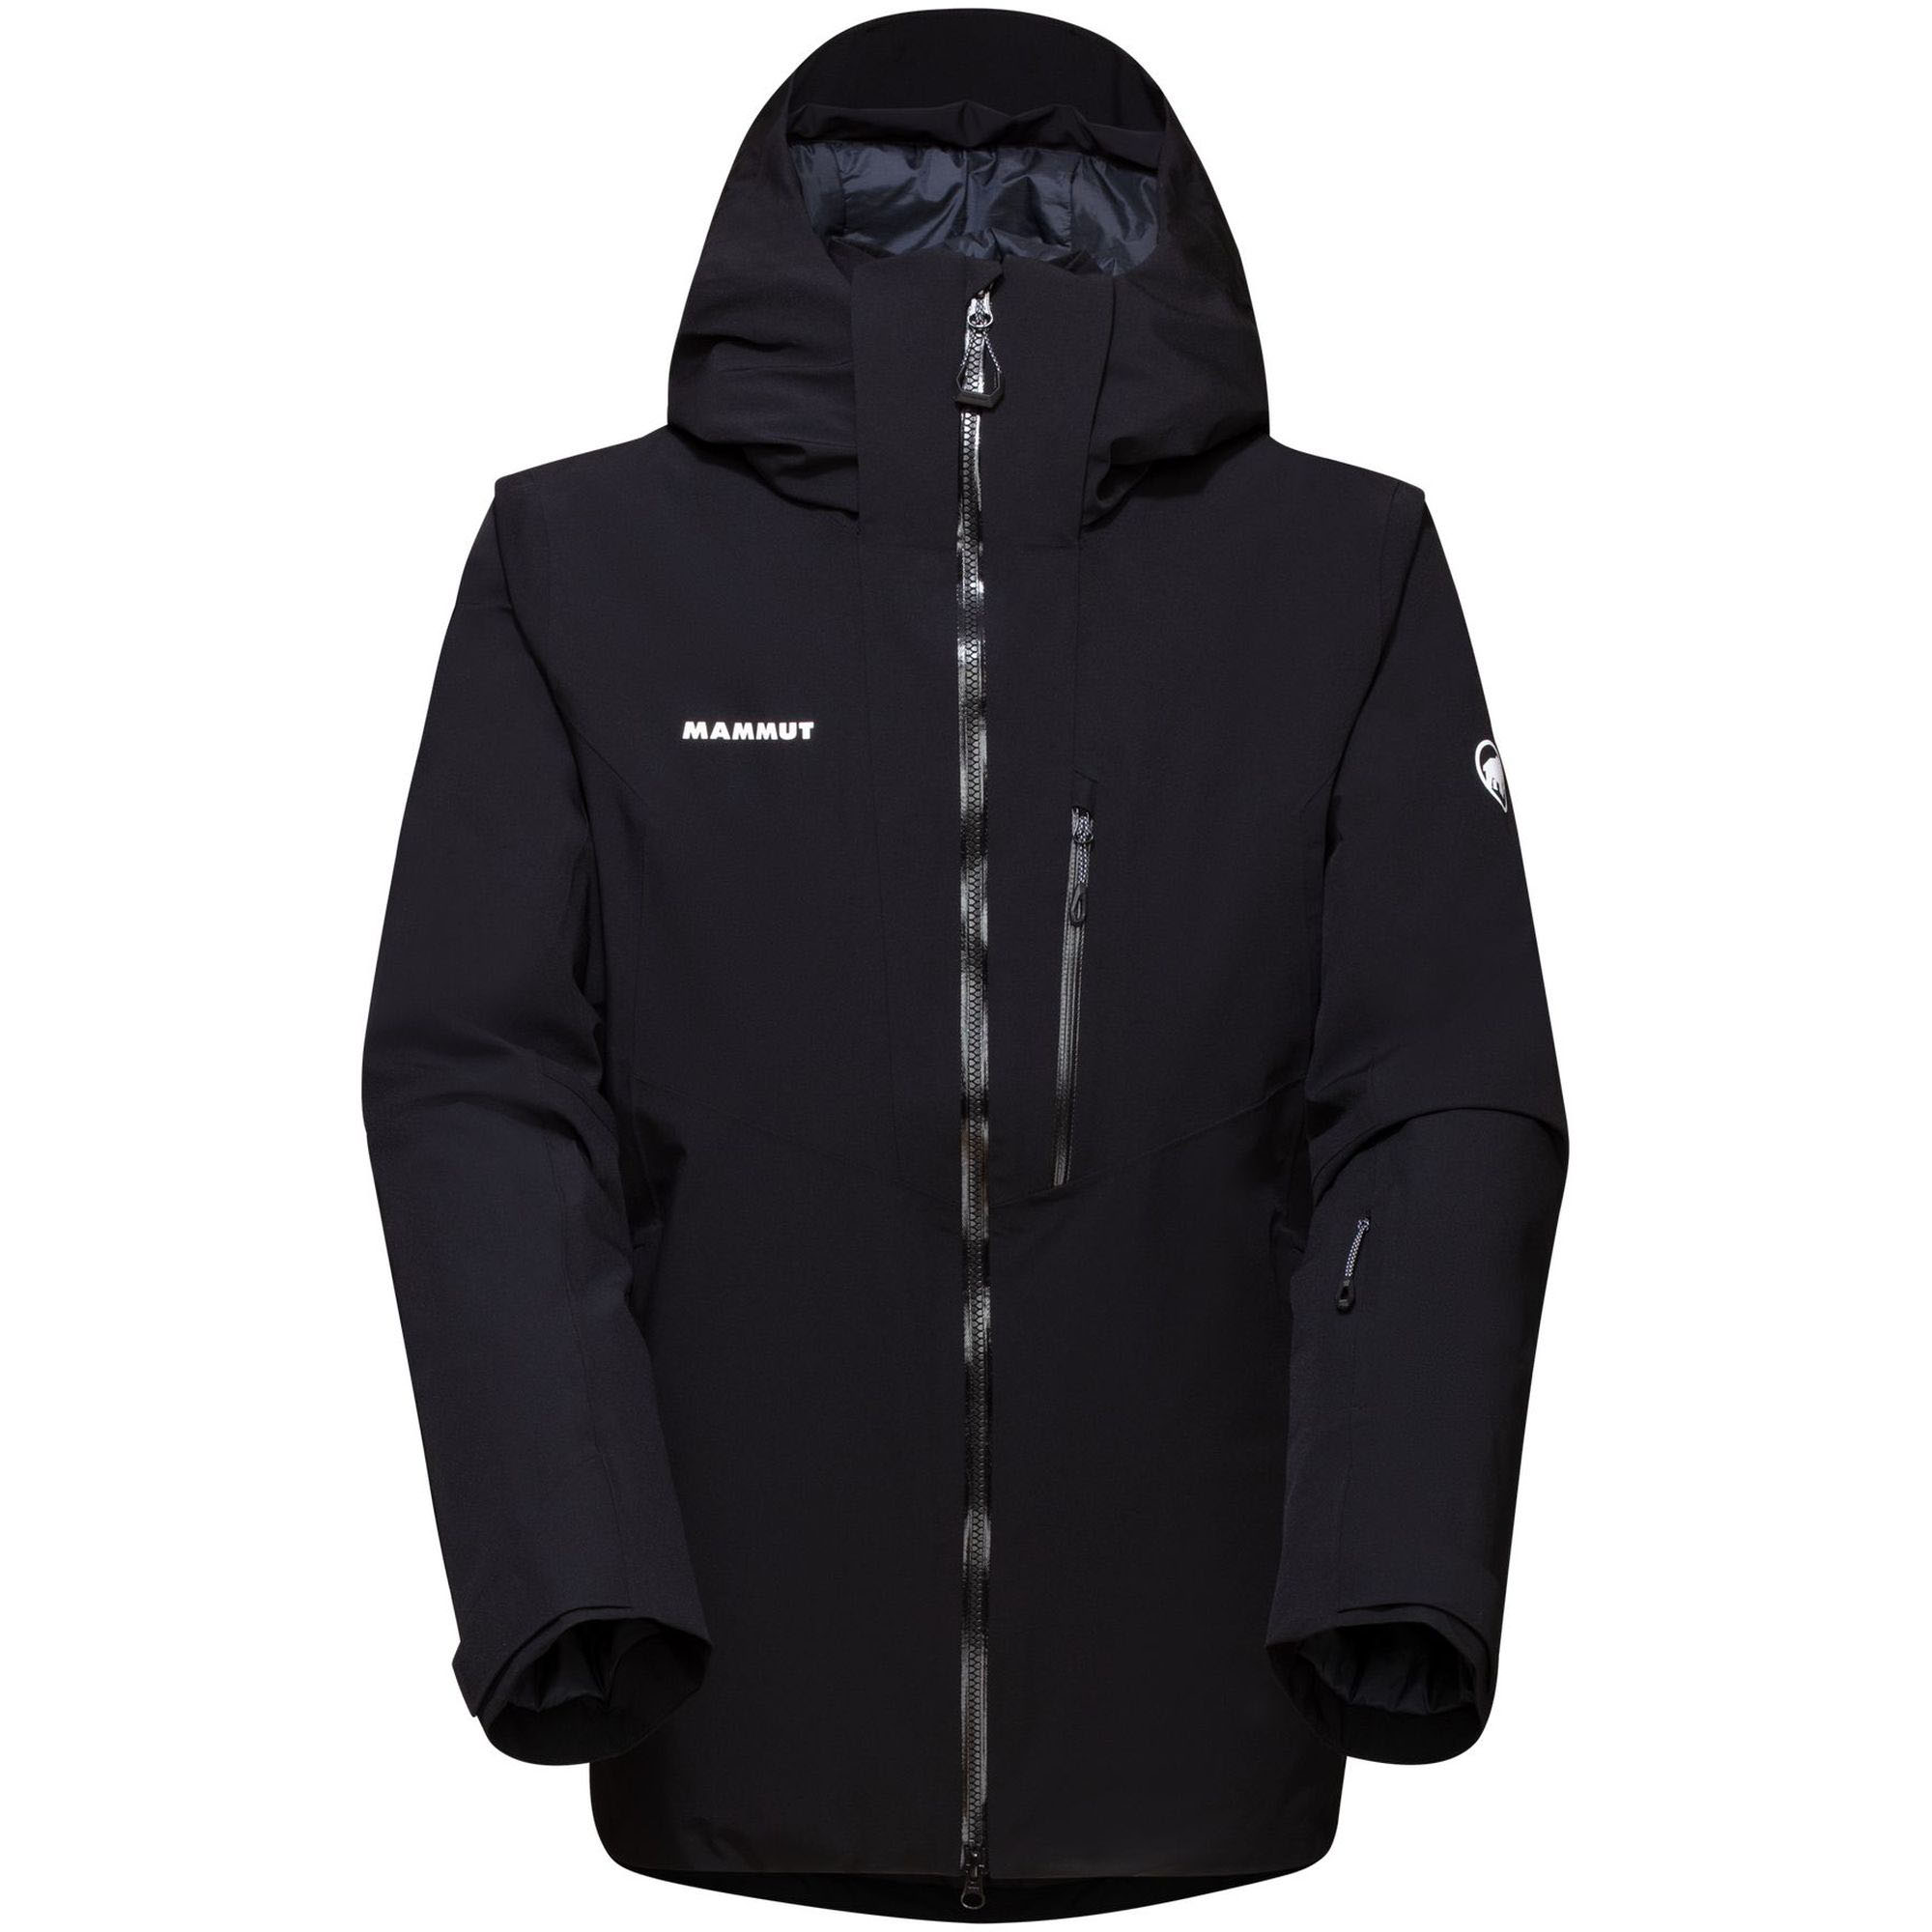 Stoney HS Thermo Jkt M